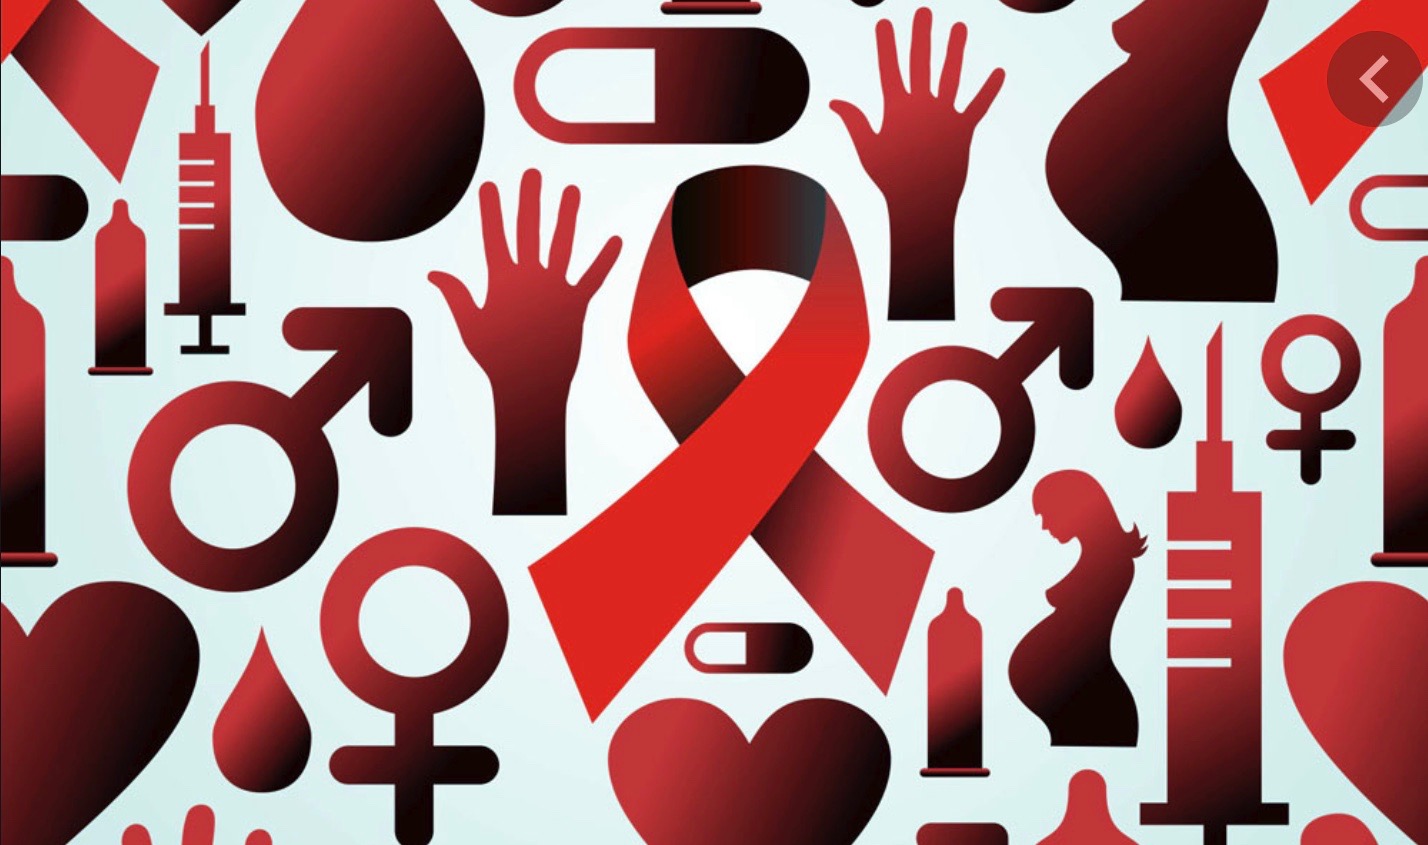 The-Impacts-of-Covid-19-on-Health-and-Human-Rights-Among-Women-Living-with-HIV-in-Nepal-A-Rapid-Assessment-from-a-Community-Led-Participatory-Study.